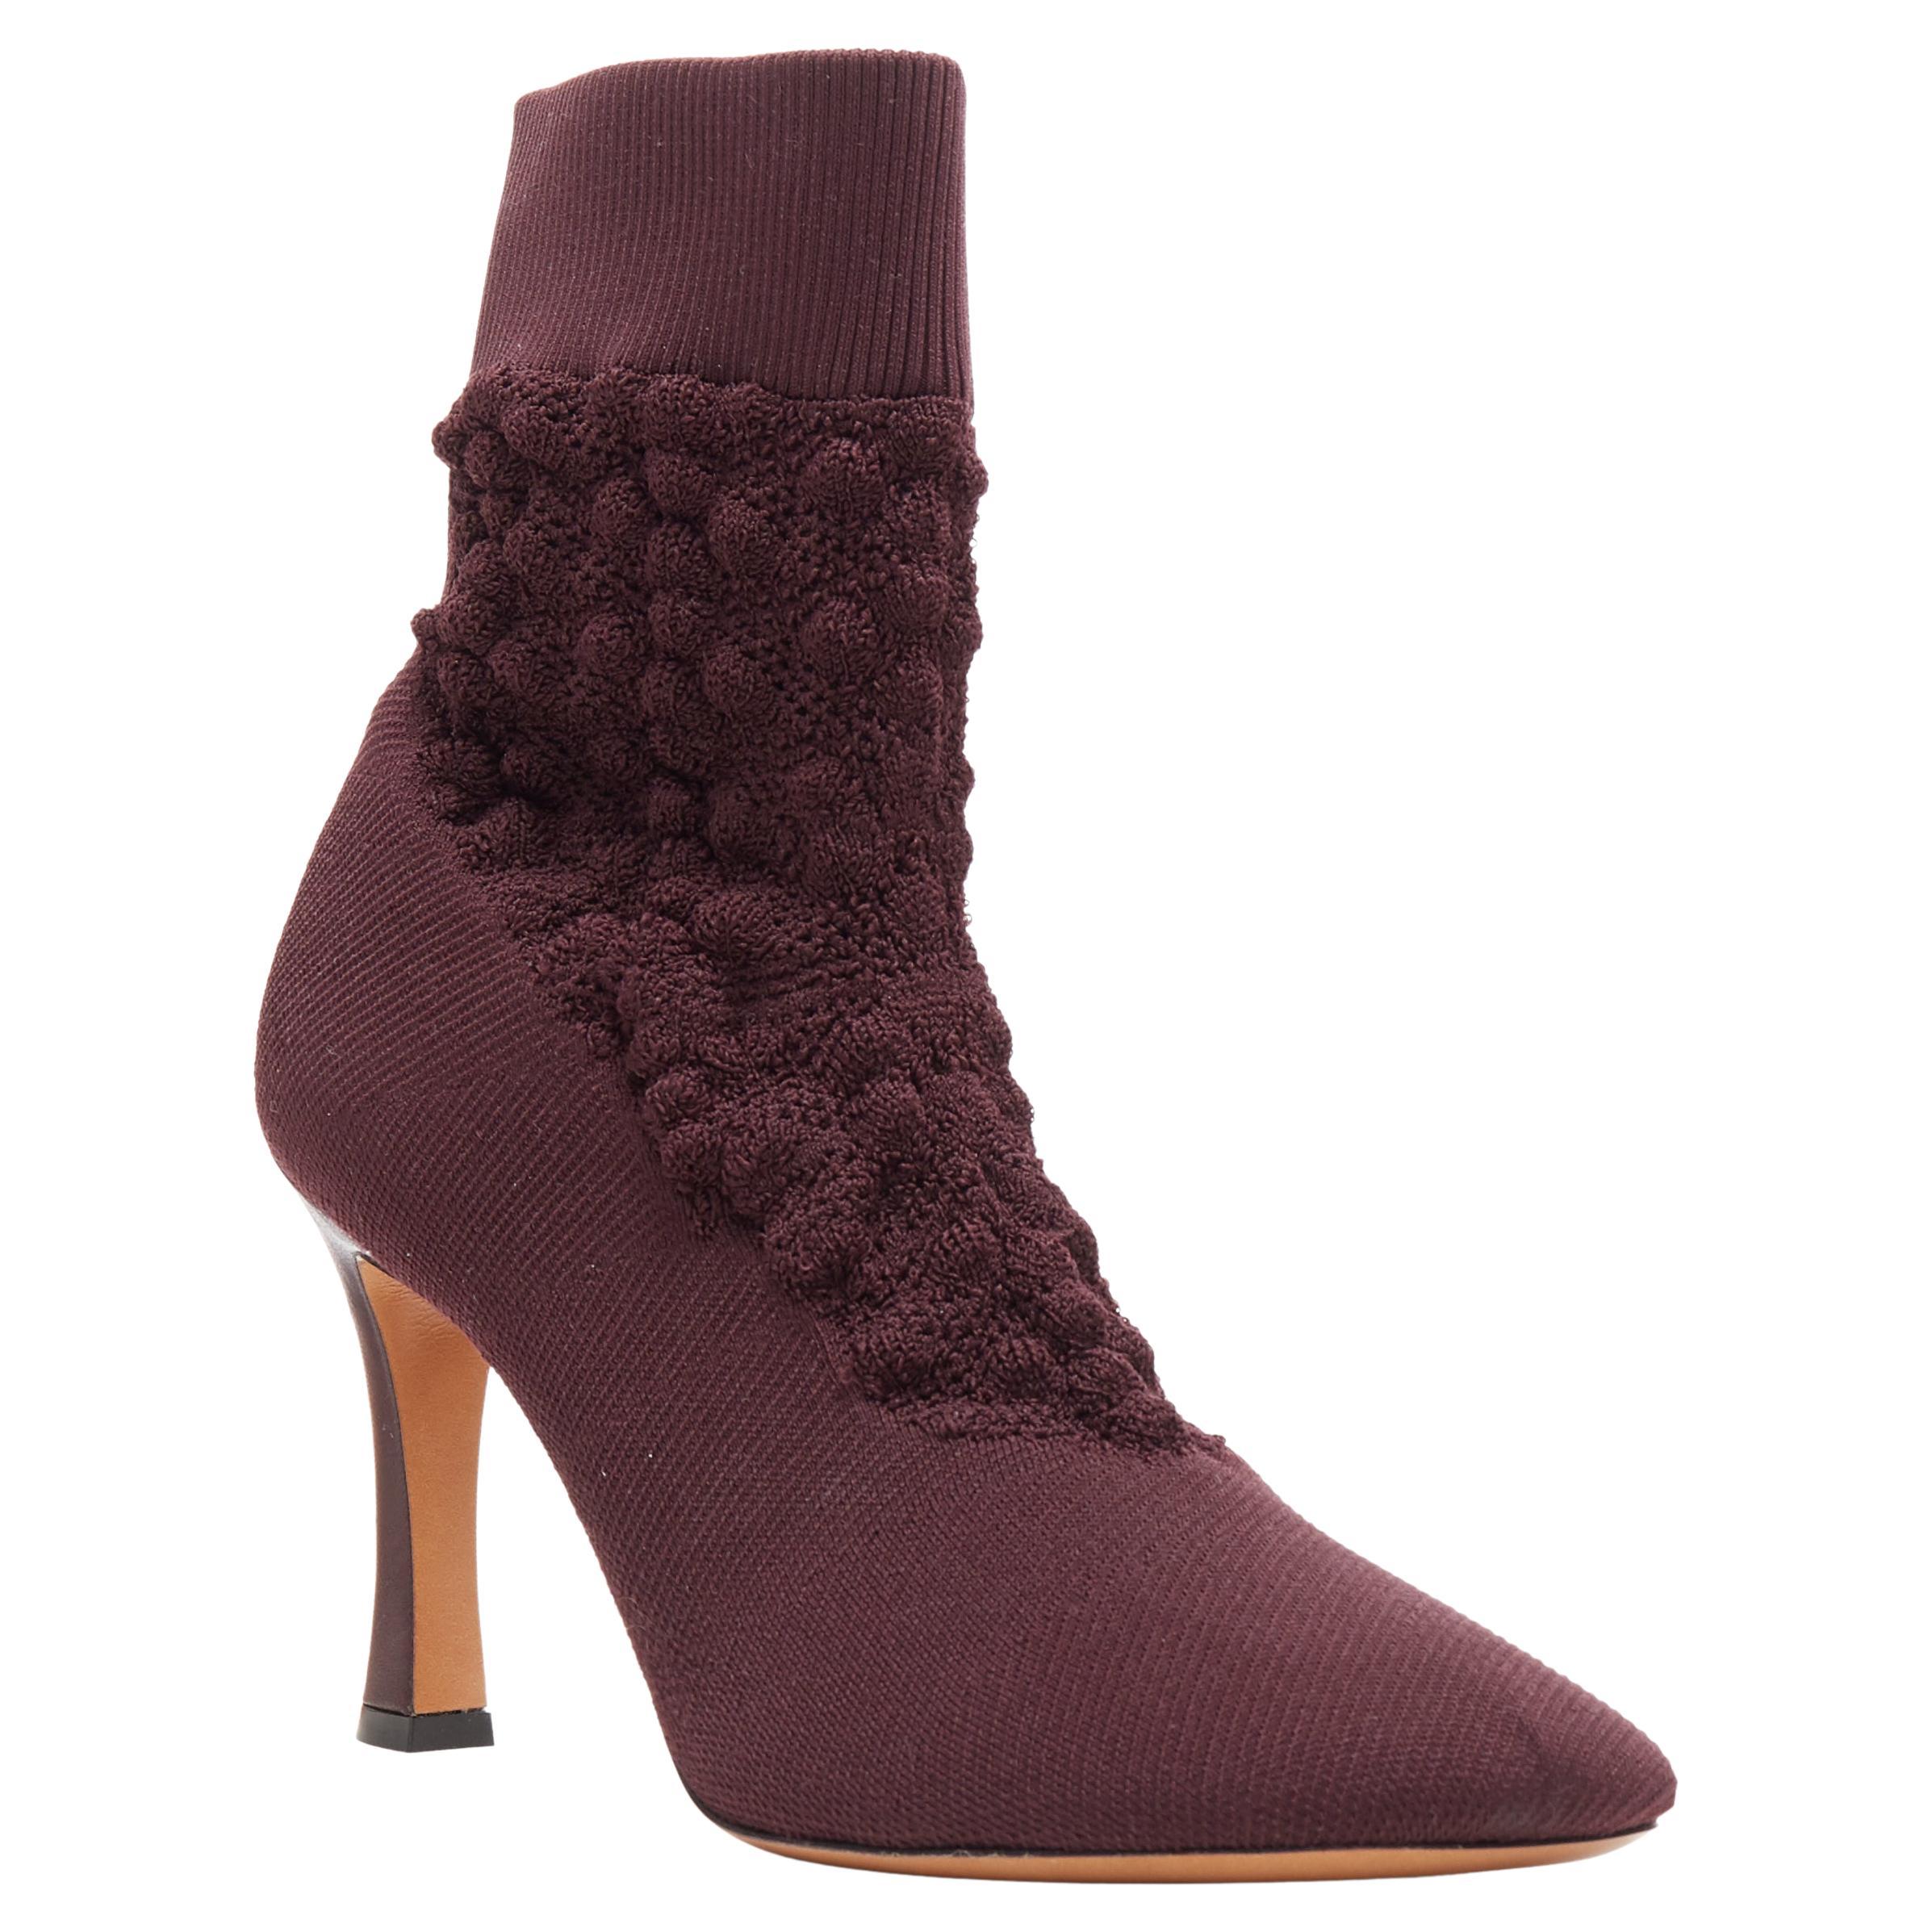 new OLD CELINE Glove Bootie burgundy textured sock knit square toe boots EU40 For Sale